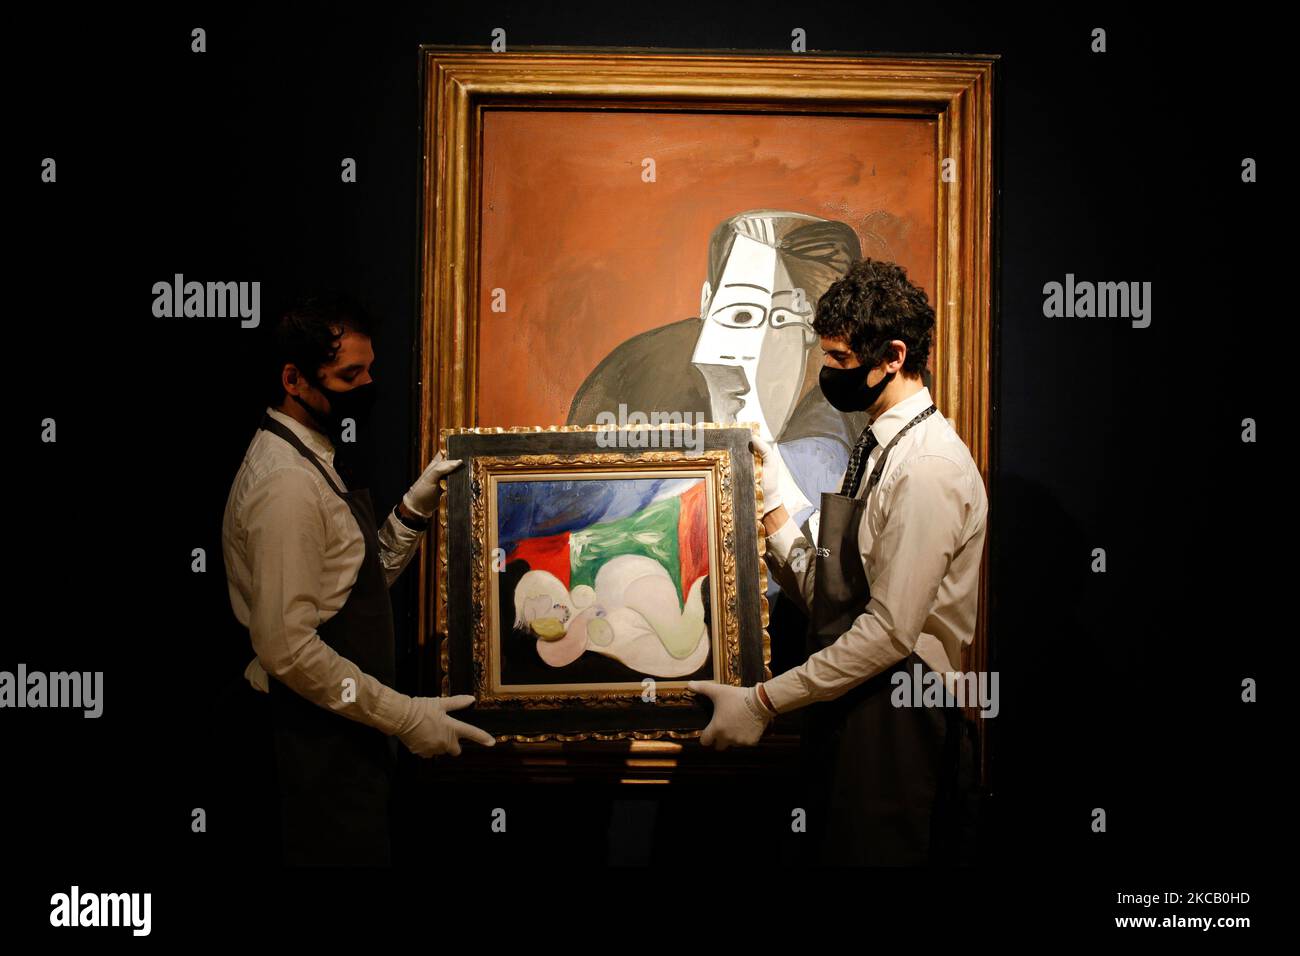 Members of staff pose holding oil on canvas work 'Femme nue couchee au collier (Marie-Thérèse)', by Pablo Picasso, estimated at GBP9,000,000-15,000,000, and in front of oil on canvas work 'Femme assise dans un fauteuil noir (Jacqueline)', also by Picasso, estimated at GBP6,000,000-9,000,000, during a press preview for the upcoming 20th Century Art and Art of the Surreal sale at Christie's auction house in London, England, on March 16, 2021. The sale takes place next Tuesday, March 23. (Photo by David Cliff/NurPhoto) Stock Photo